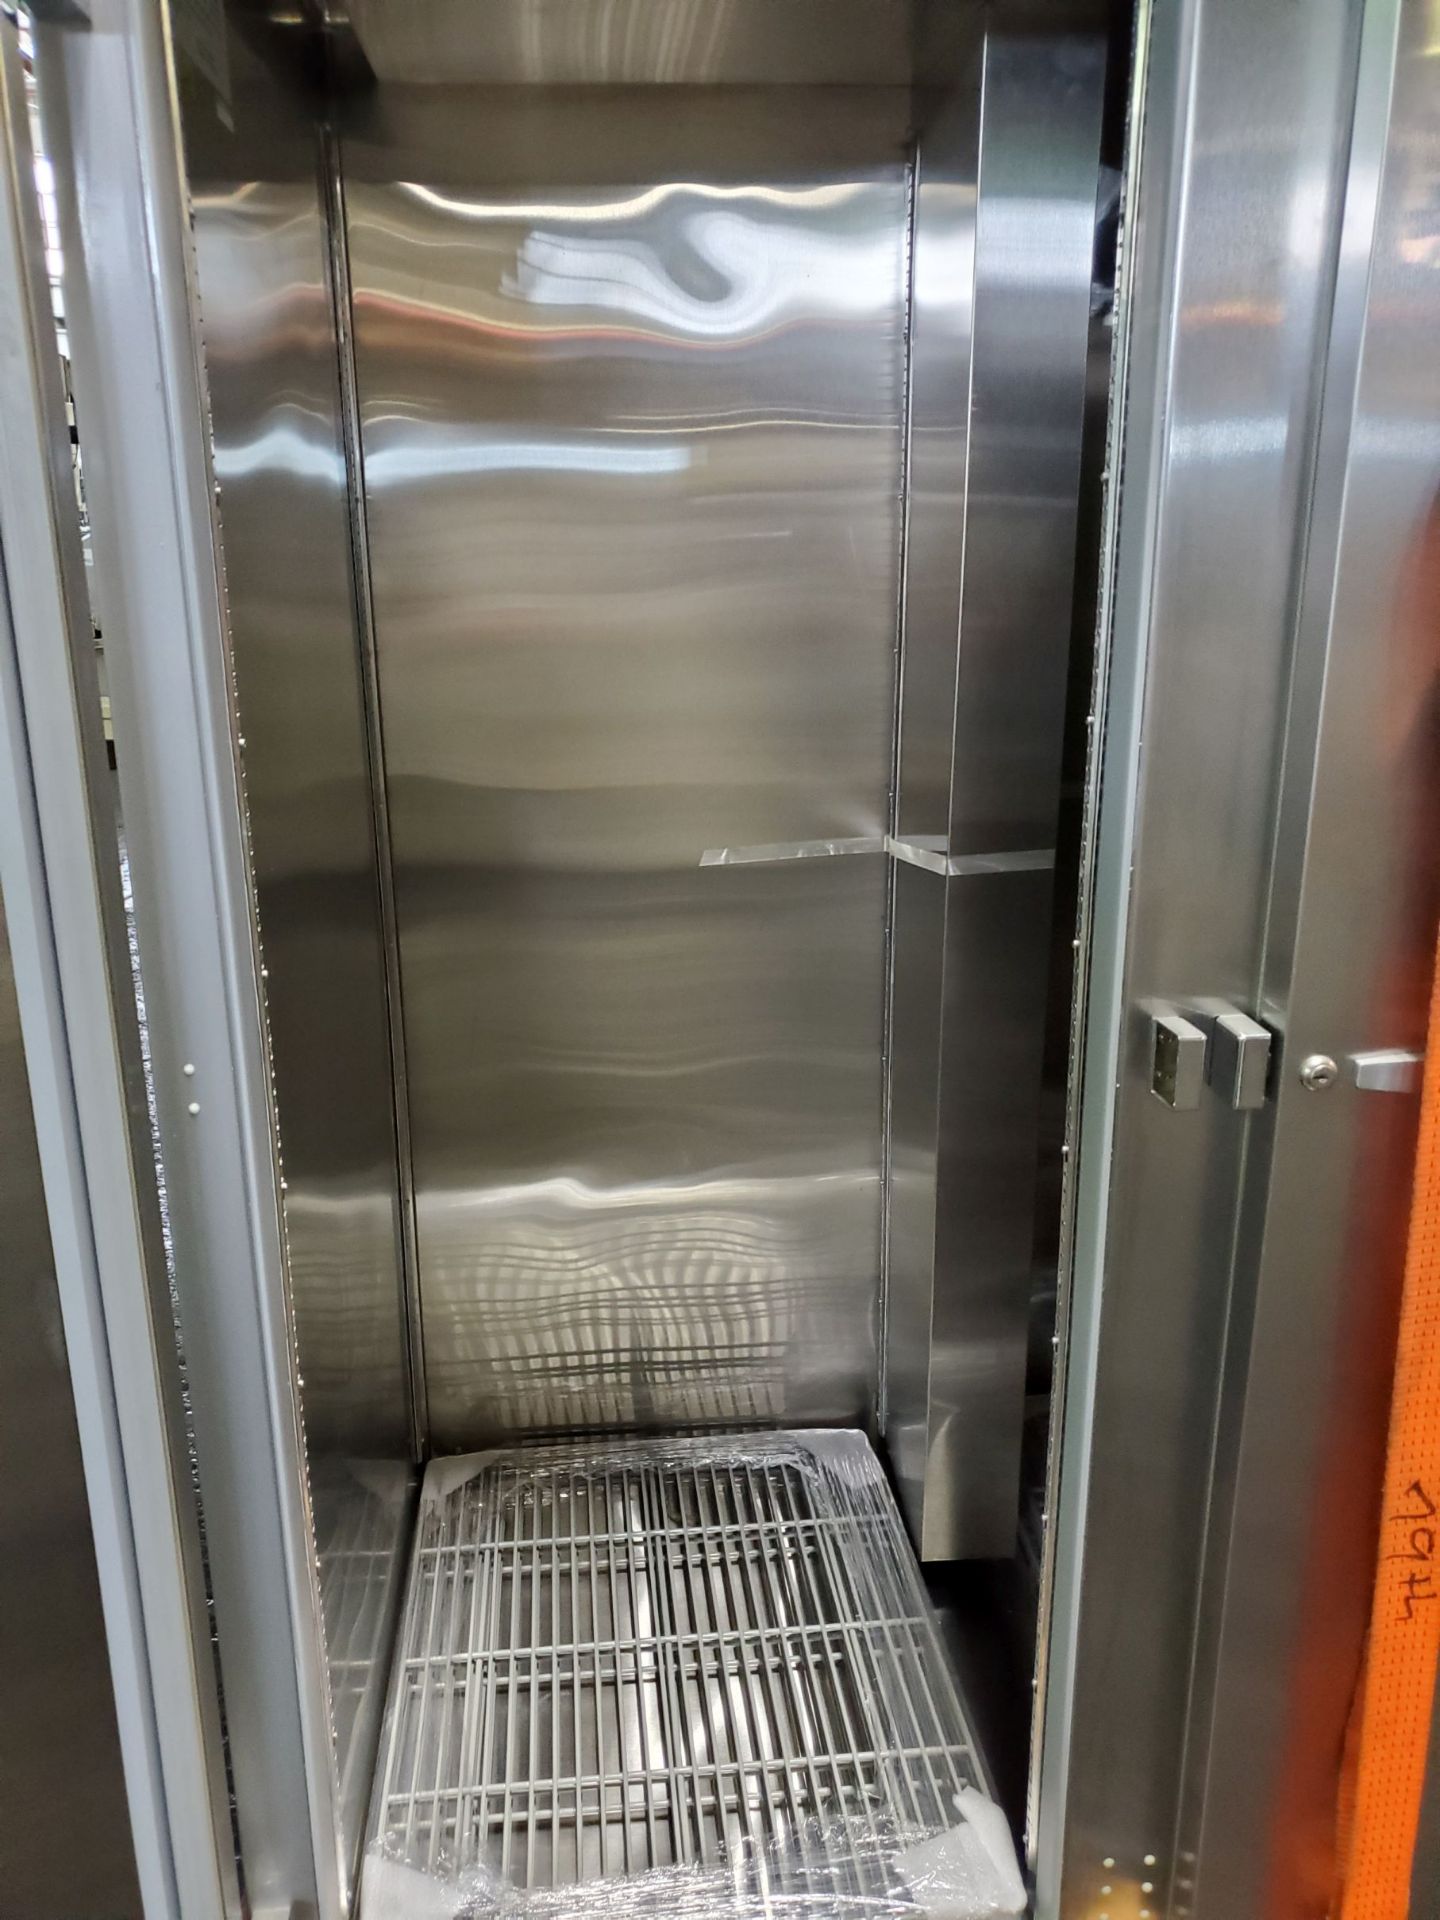 Fisher Scientific Isotemp Plus Freezer, 48" wide x 25"deep x 60" high chamber - Image 6 of 9